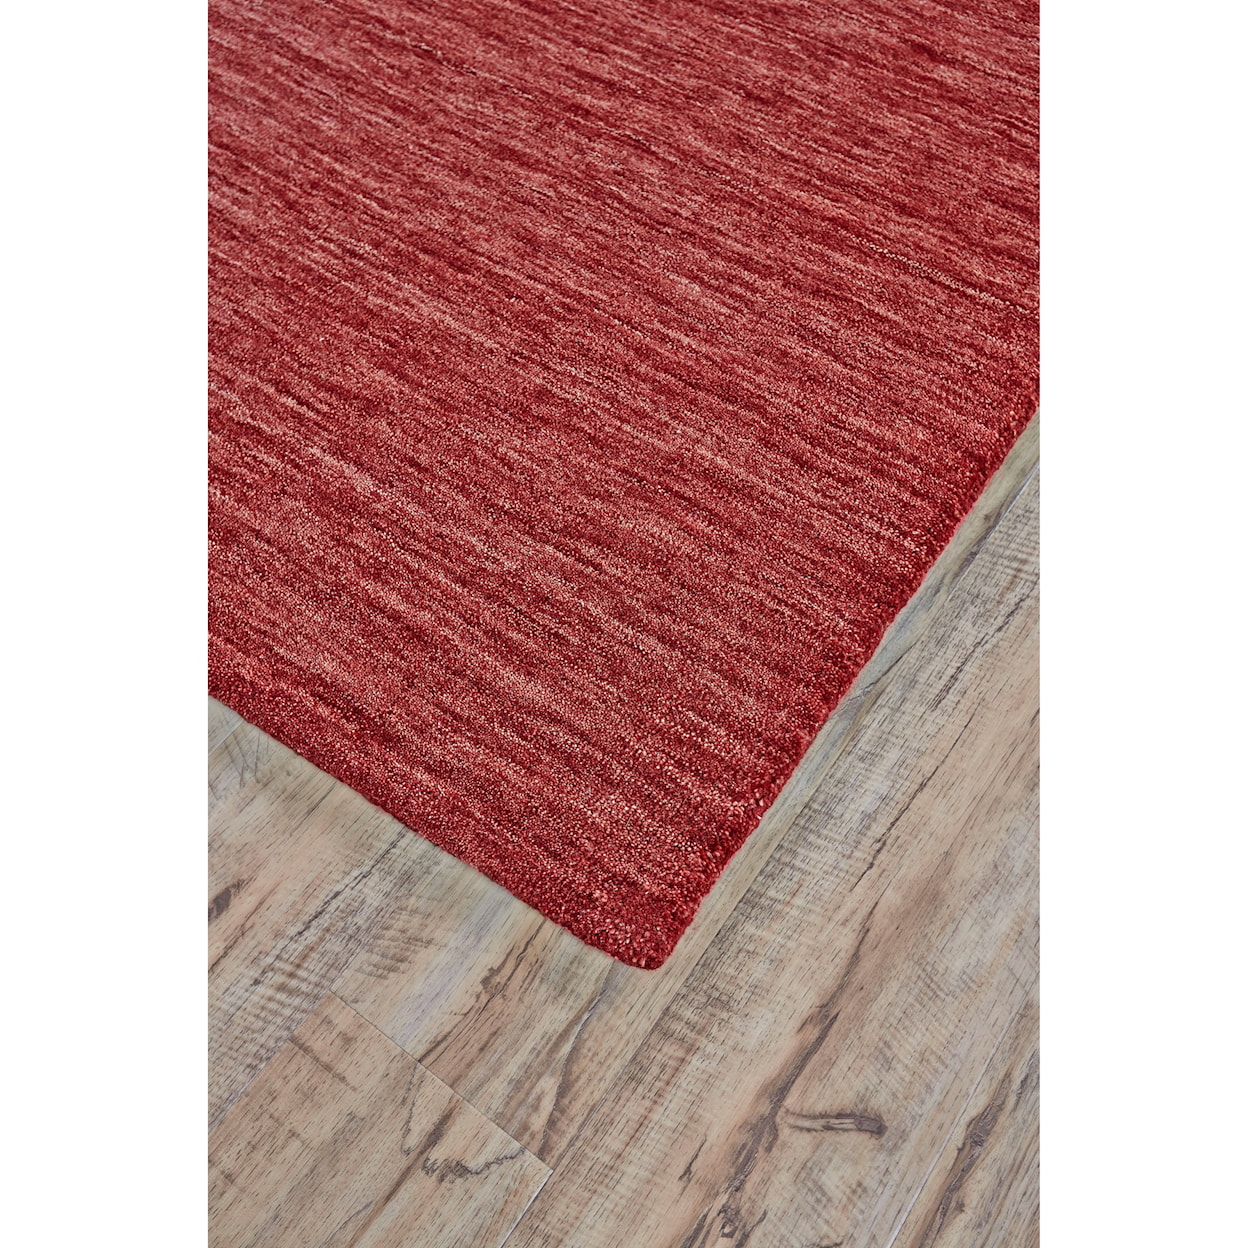 Feizy Rugs Luna Red 9'-6" x 13'-6" Area Rug